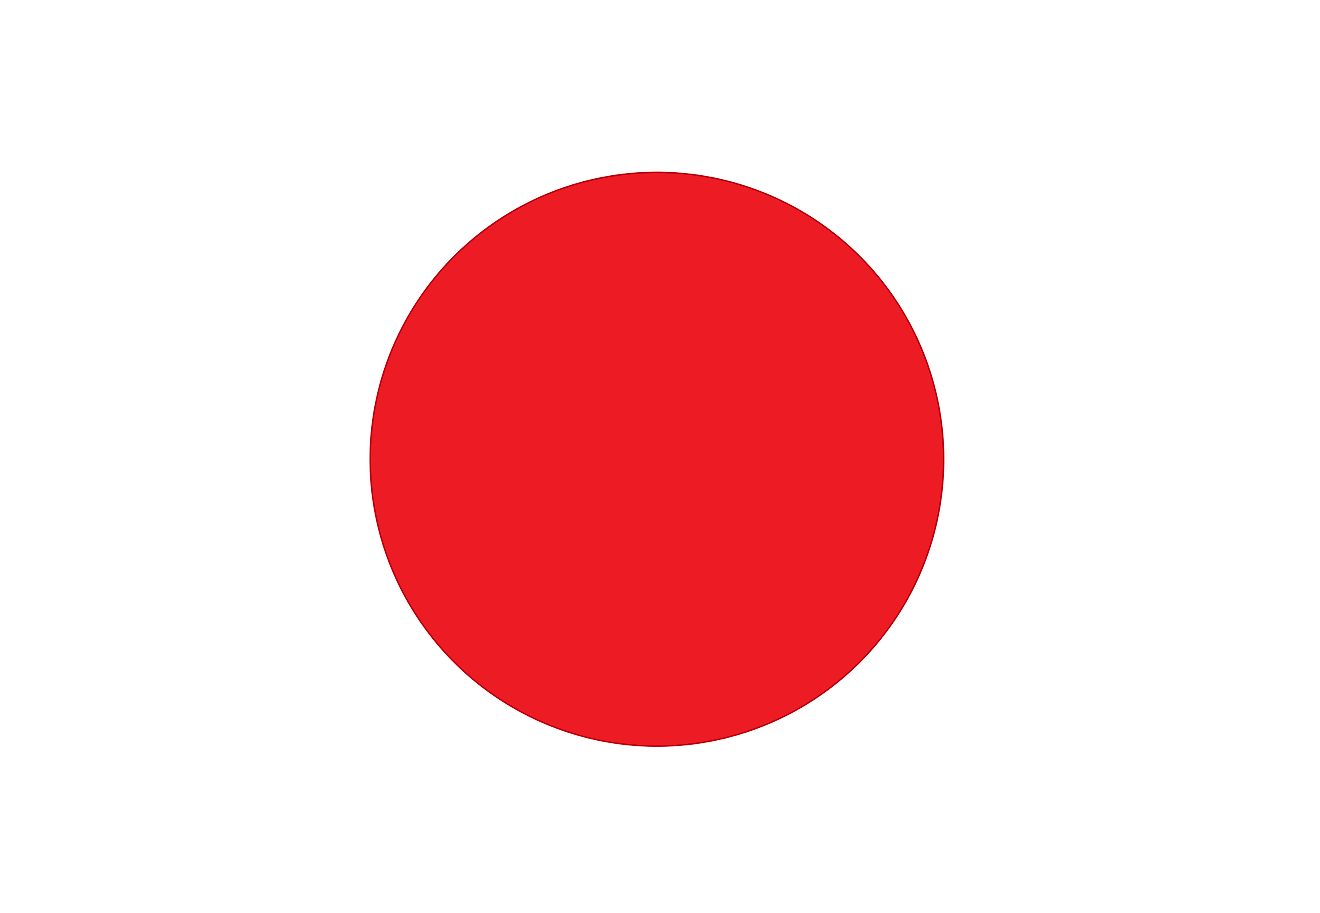 The national flag of Japan is a white rectangular banner with crimson-red disc at the center